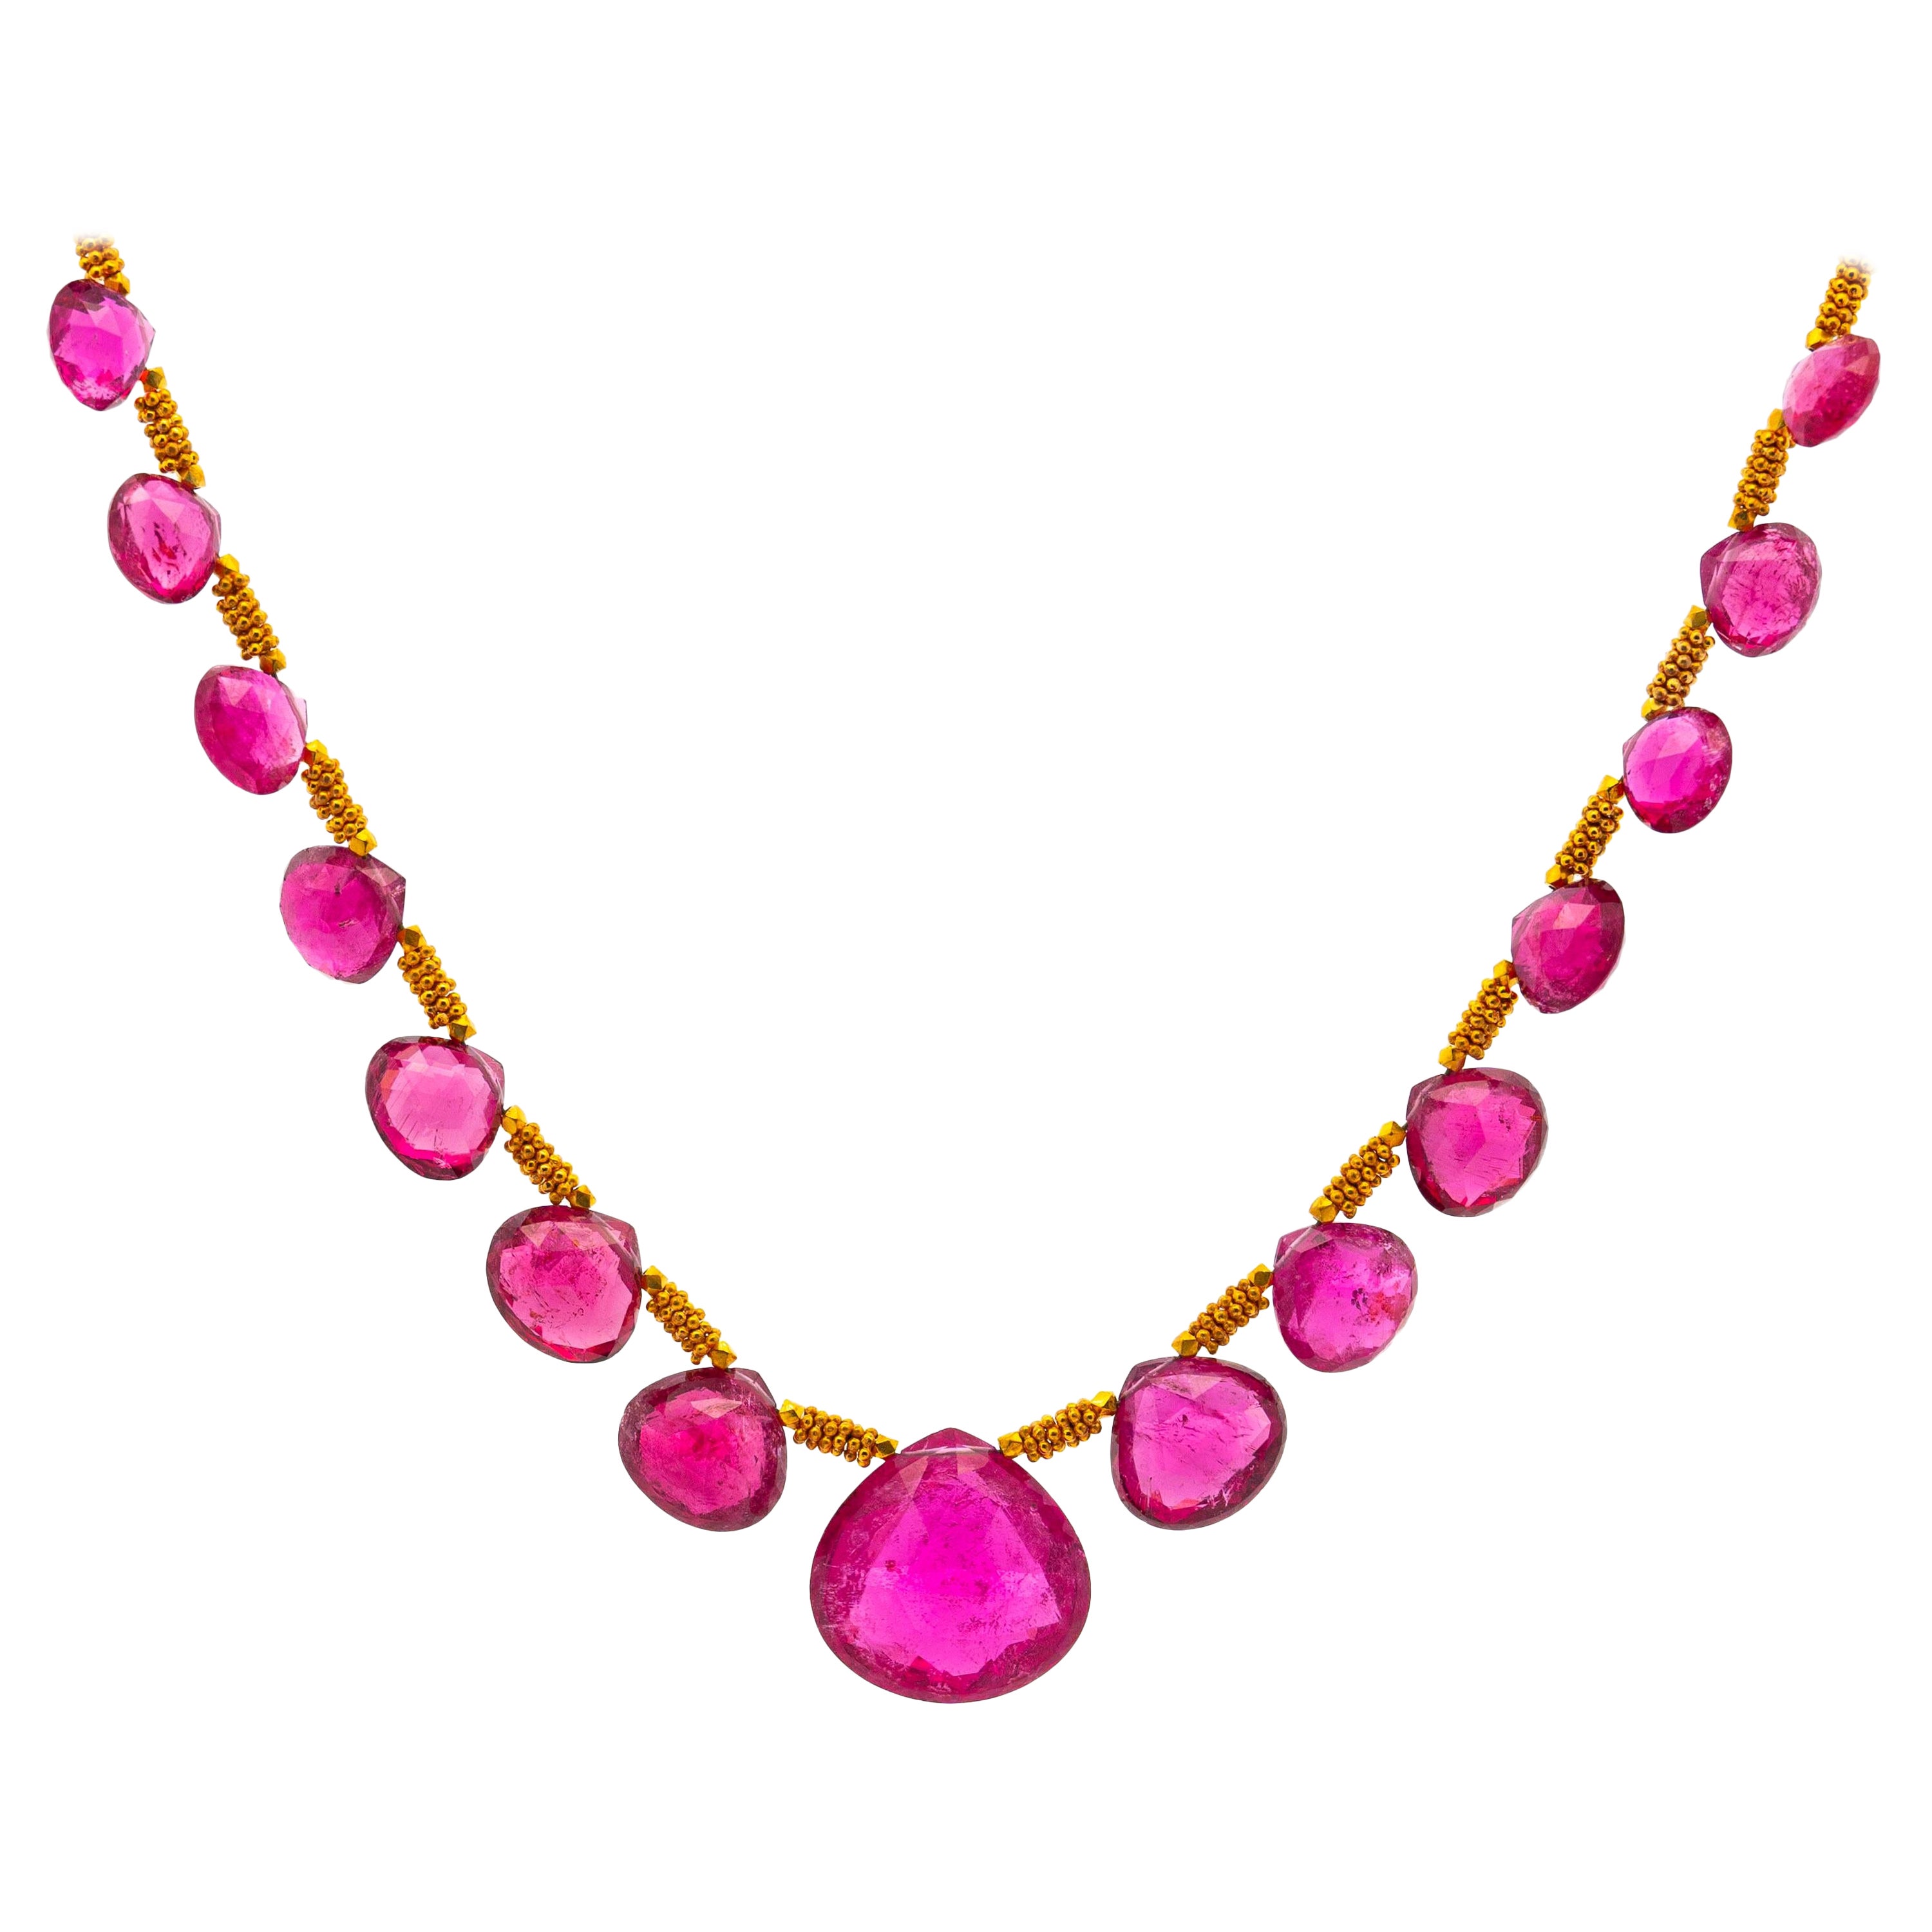 GIA Certified 120 Carat Pear-Shape Pink Rubellite Tourmaline Necklace in 22K For Sale